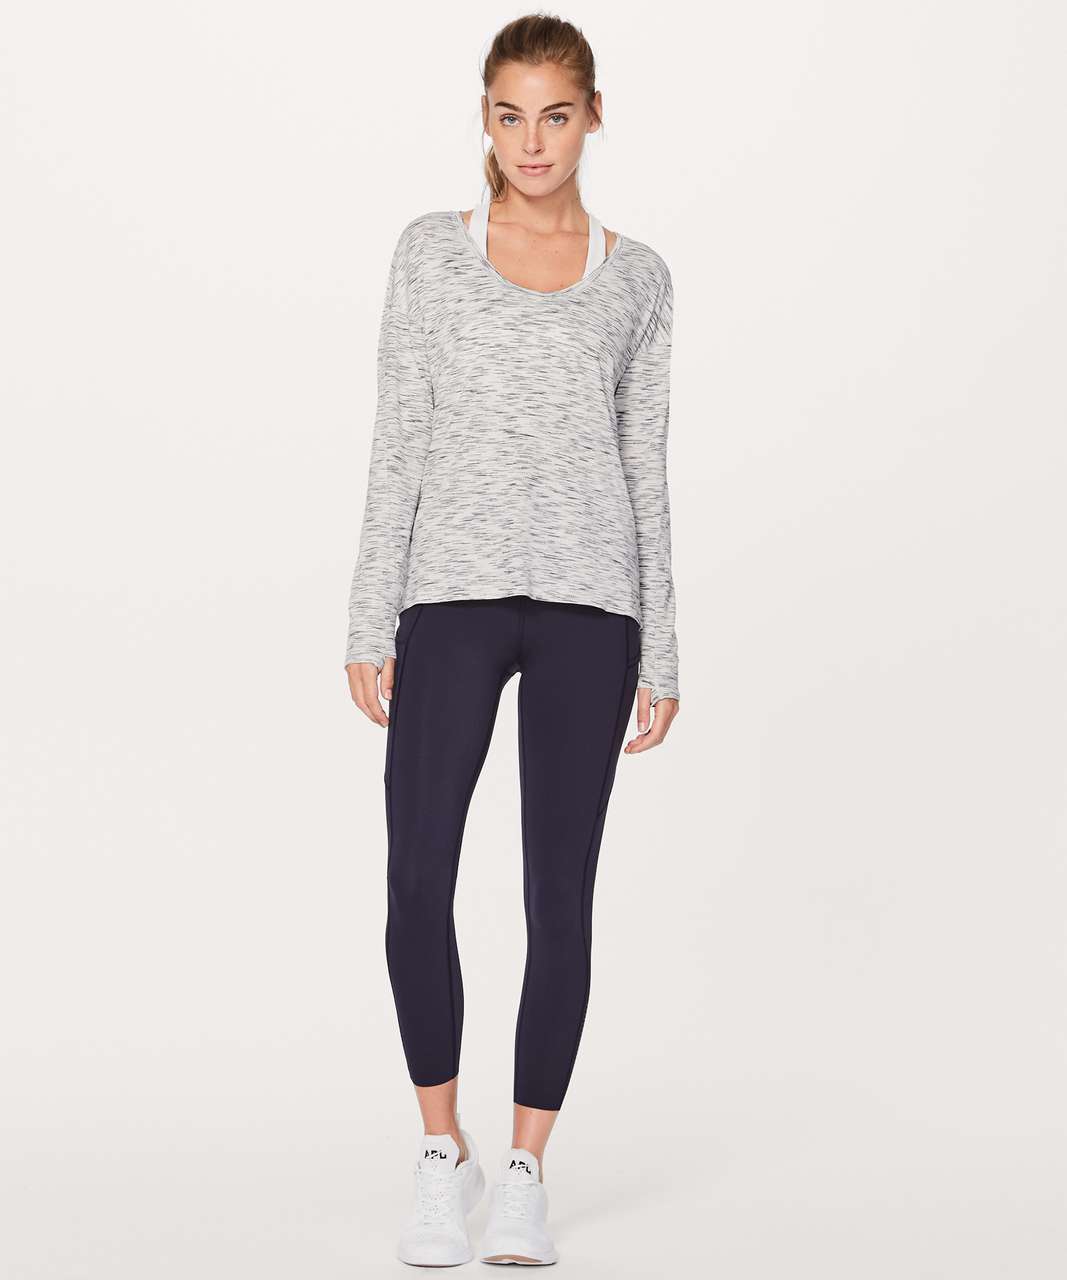 Lululemon Meant To Move Long Sleeve - Tiger Space Dye Black White